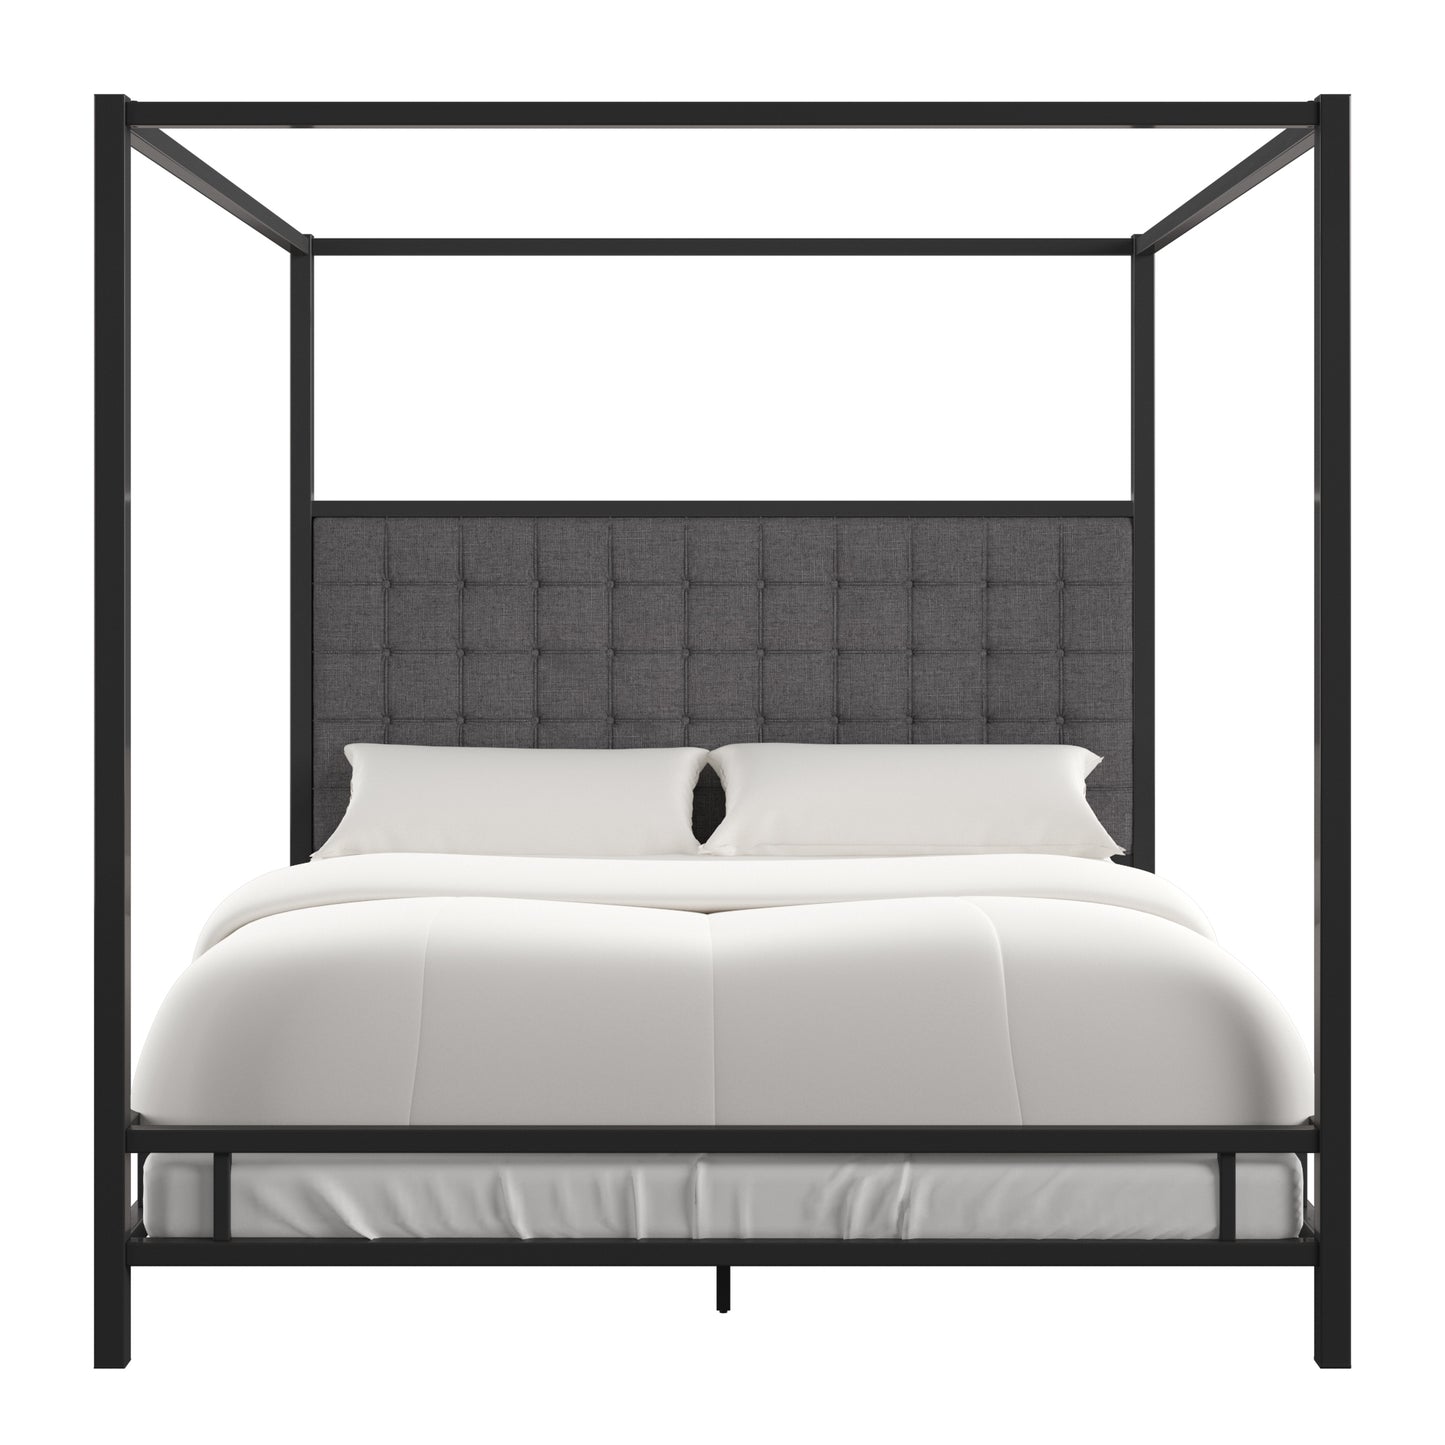 Metal Canopy Bed with Upholstered Headboard - Dark Grey Linen, Black Nickel Finish, King Size